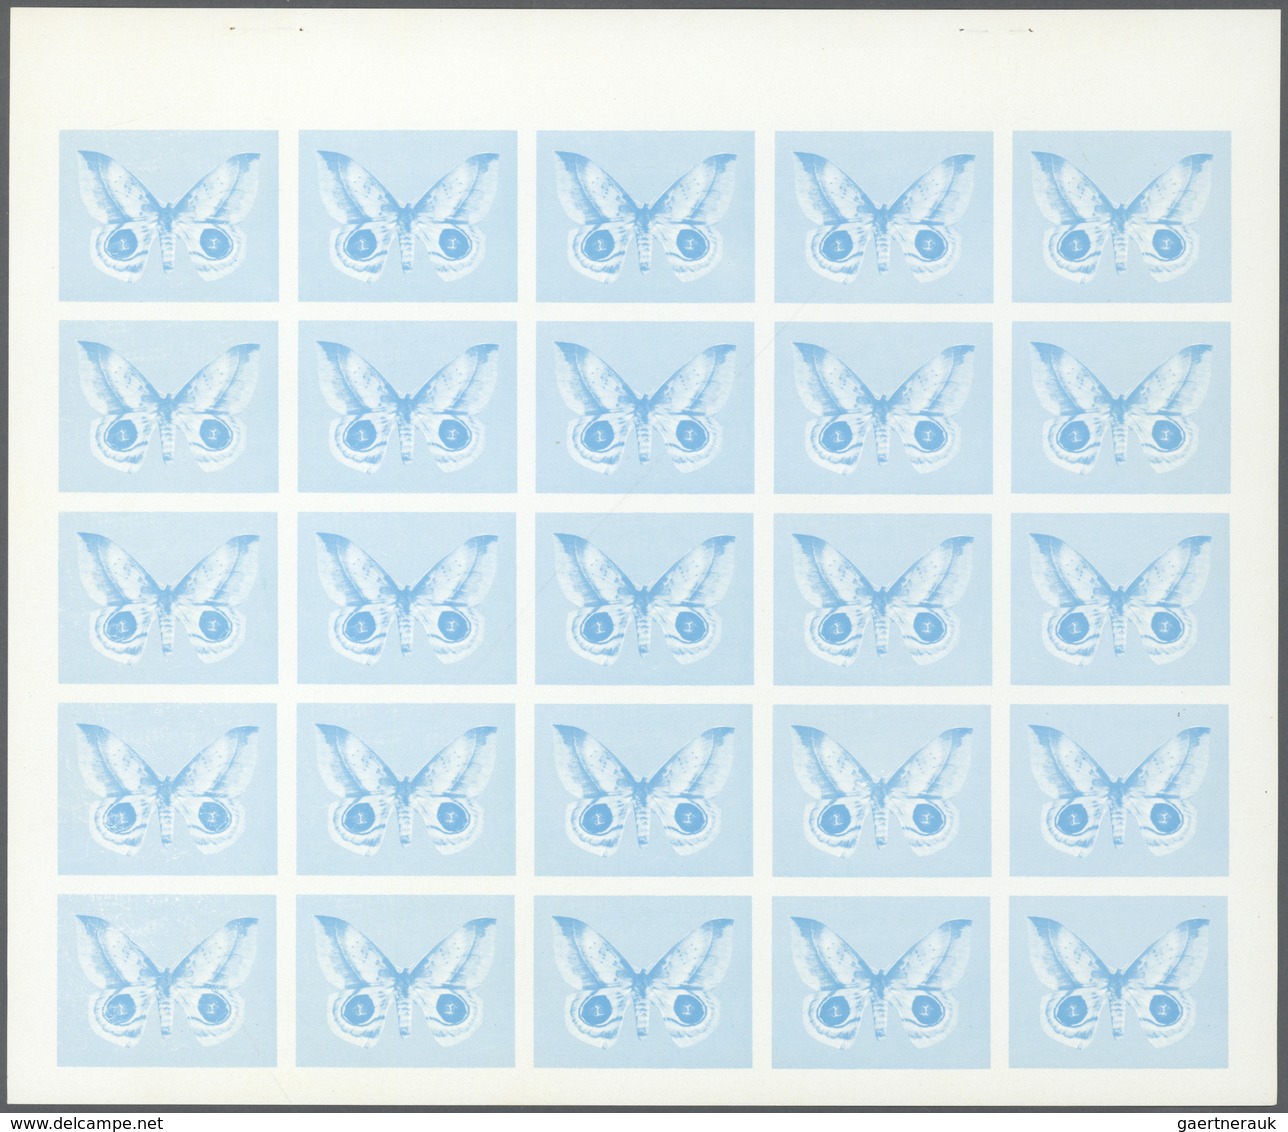 Schardscha / Sharjah: 1972. Sharjah. Progressive proof (7 phases) in complete sheets of 25 for the 7